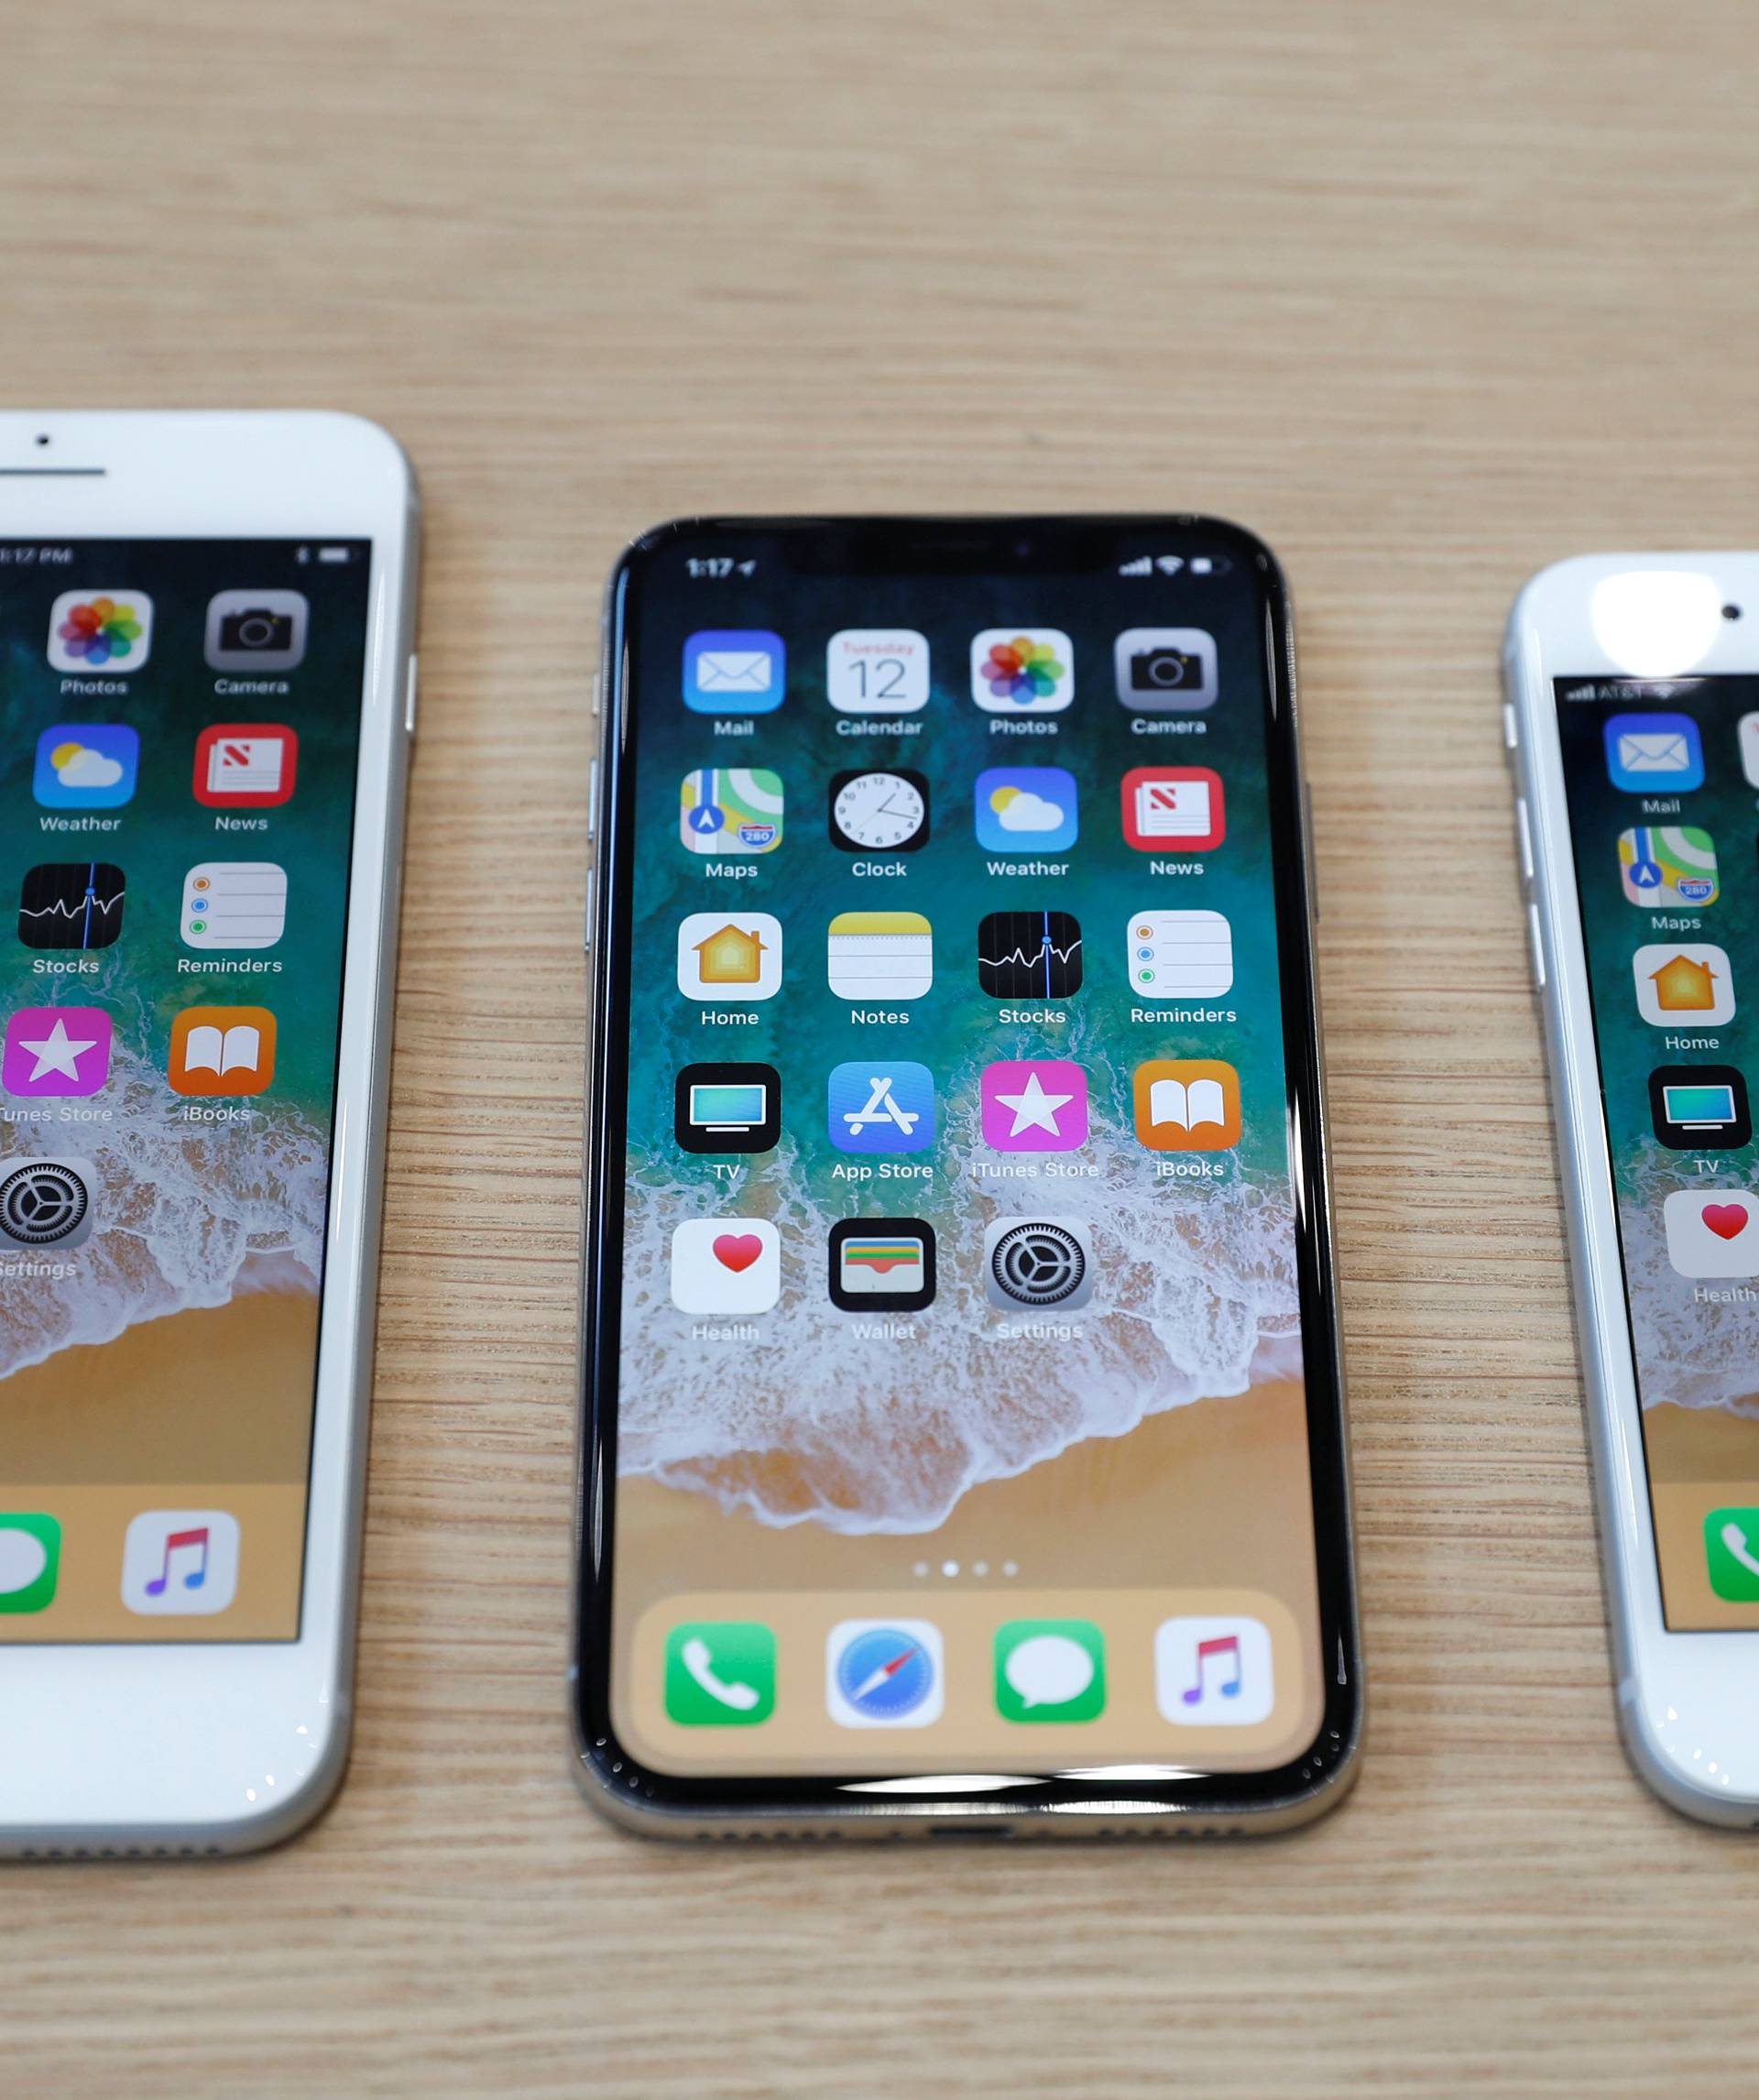 FILE PHOTO: Different iPhone 8 models are displayed during an Apple launch event in Cupertino